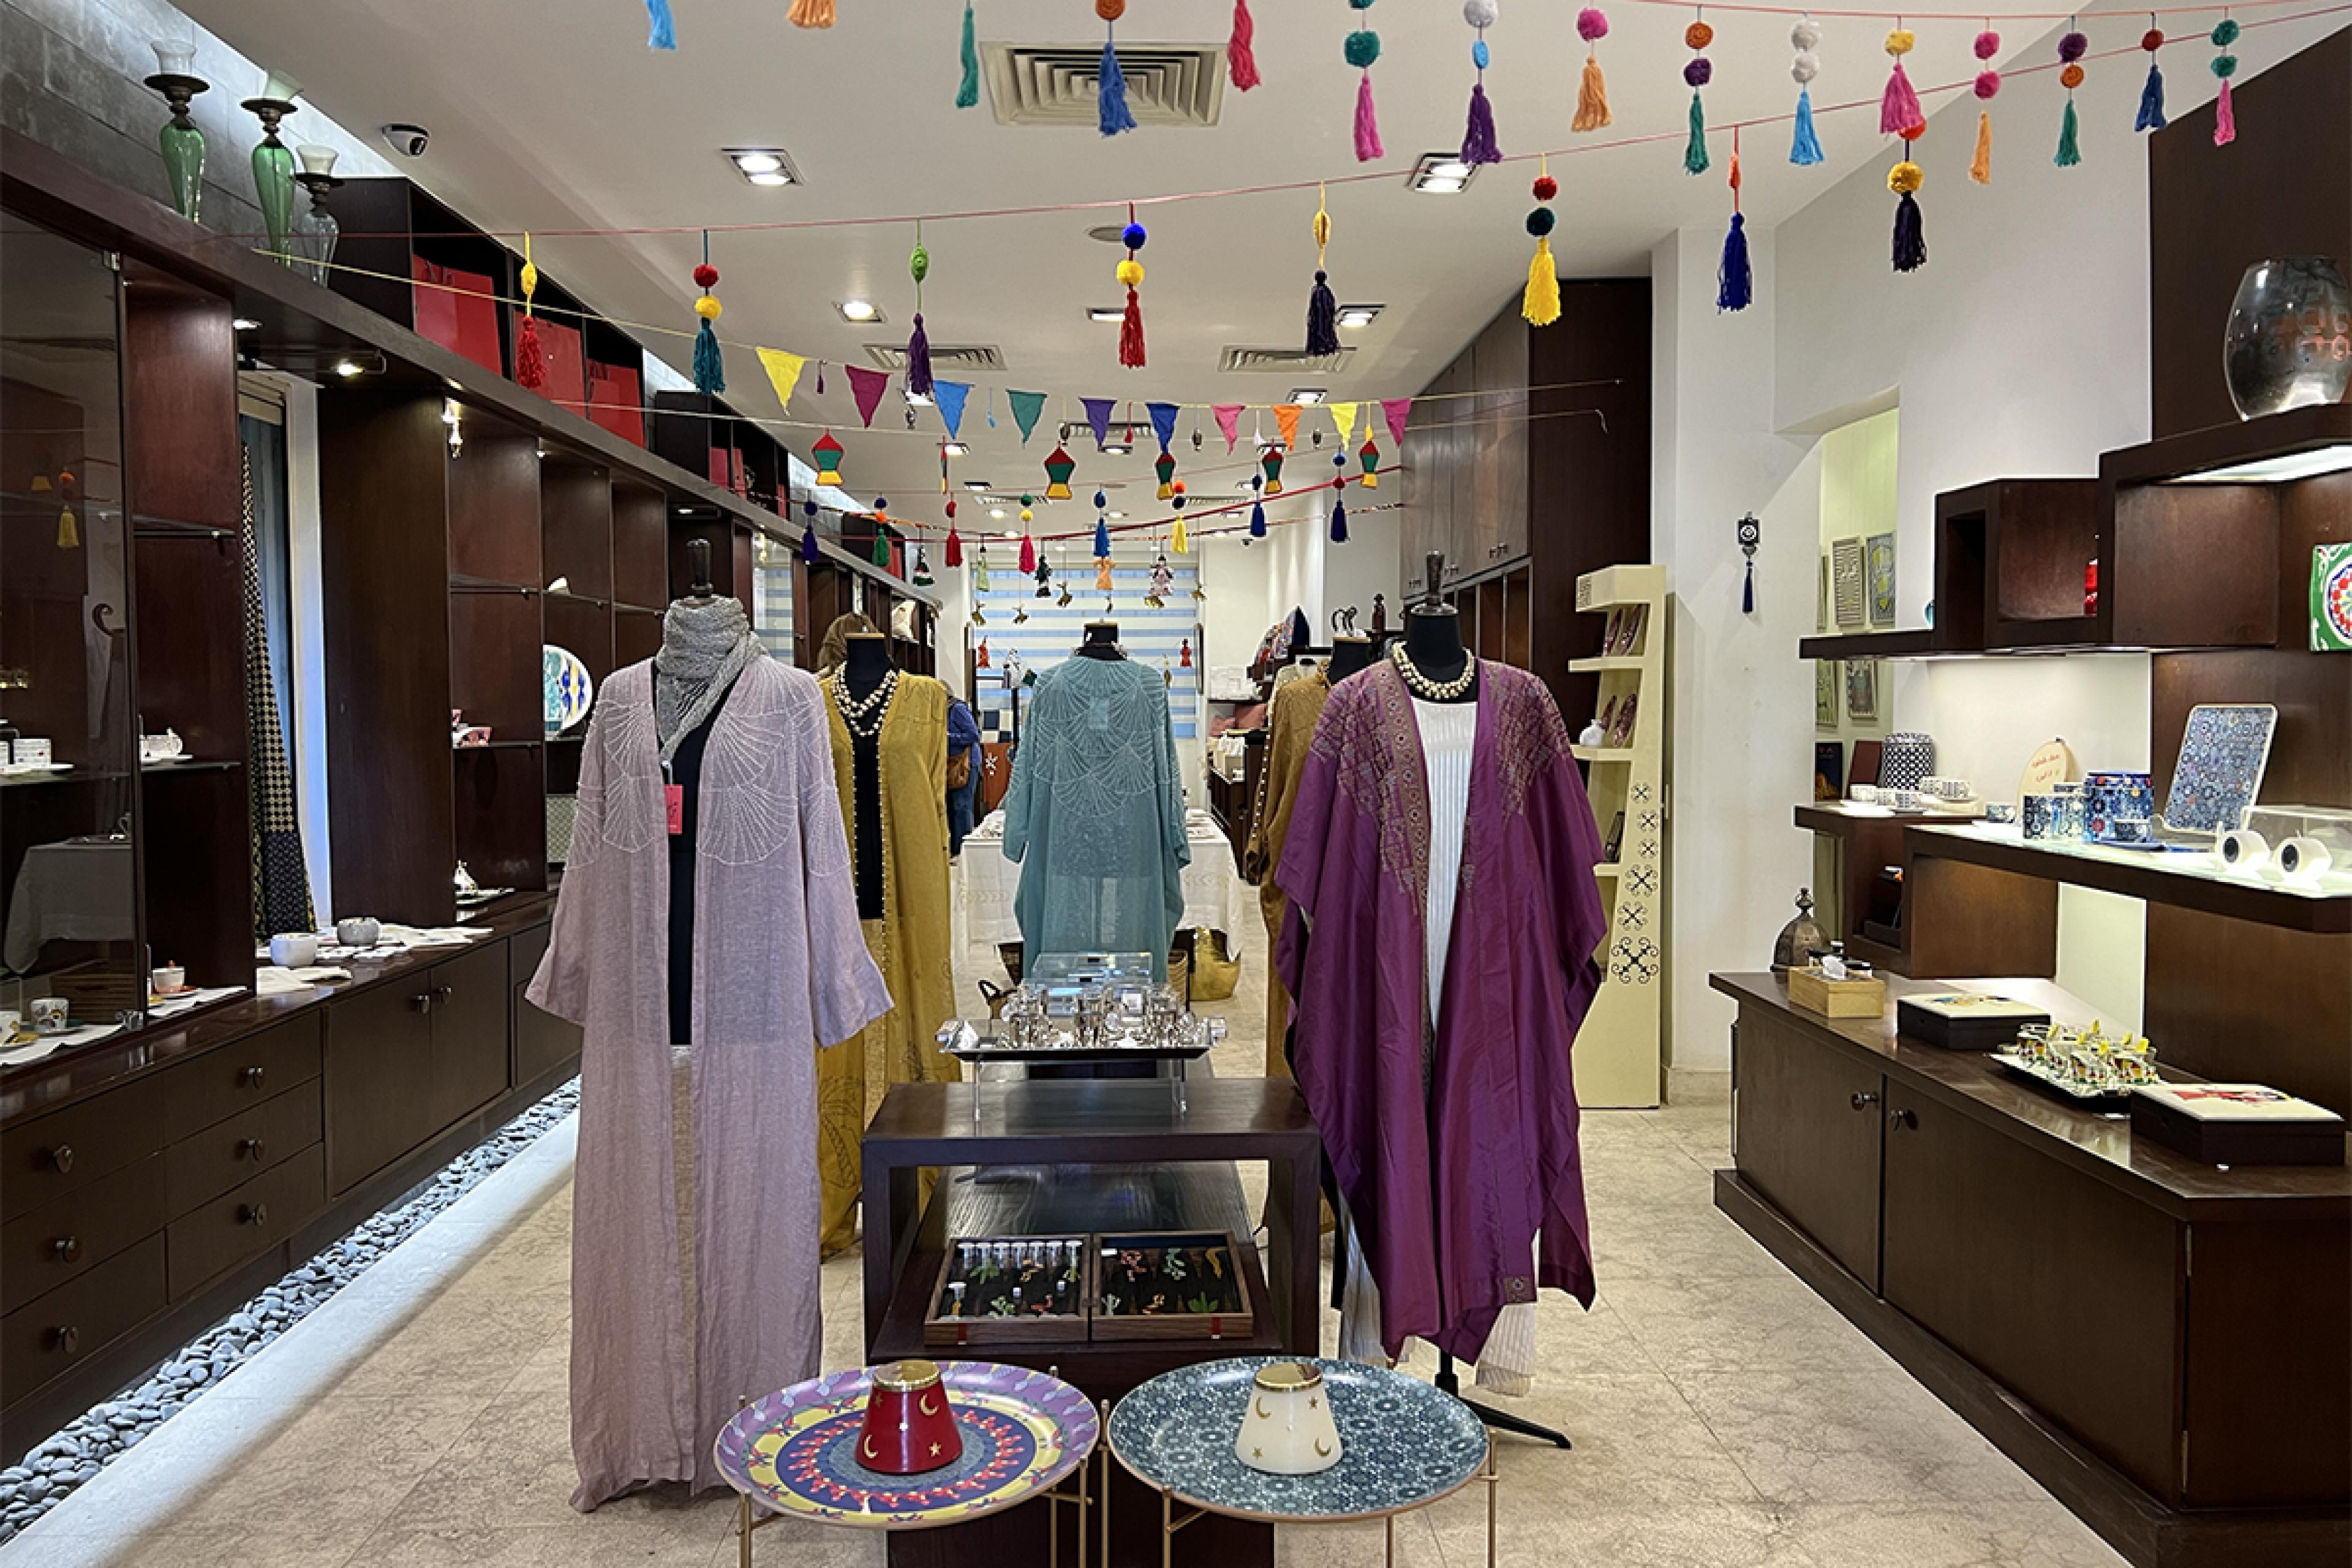 shop with tassels hanging from ceiling and various colorful north african fashions on display in center as well as brown wooden shelves selling small home goods on left and right